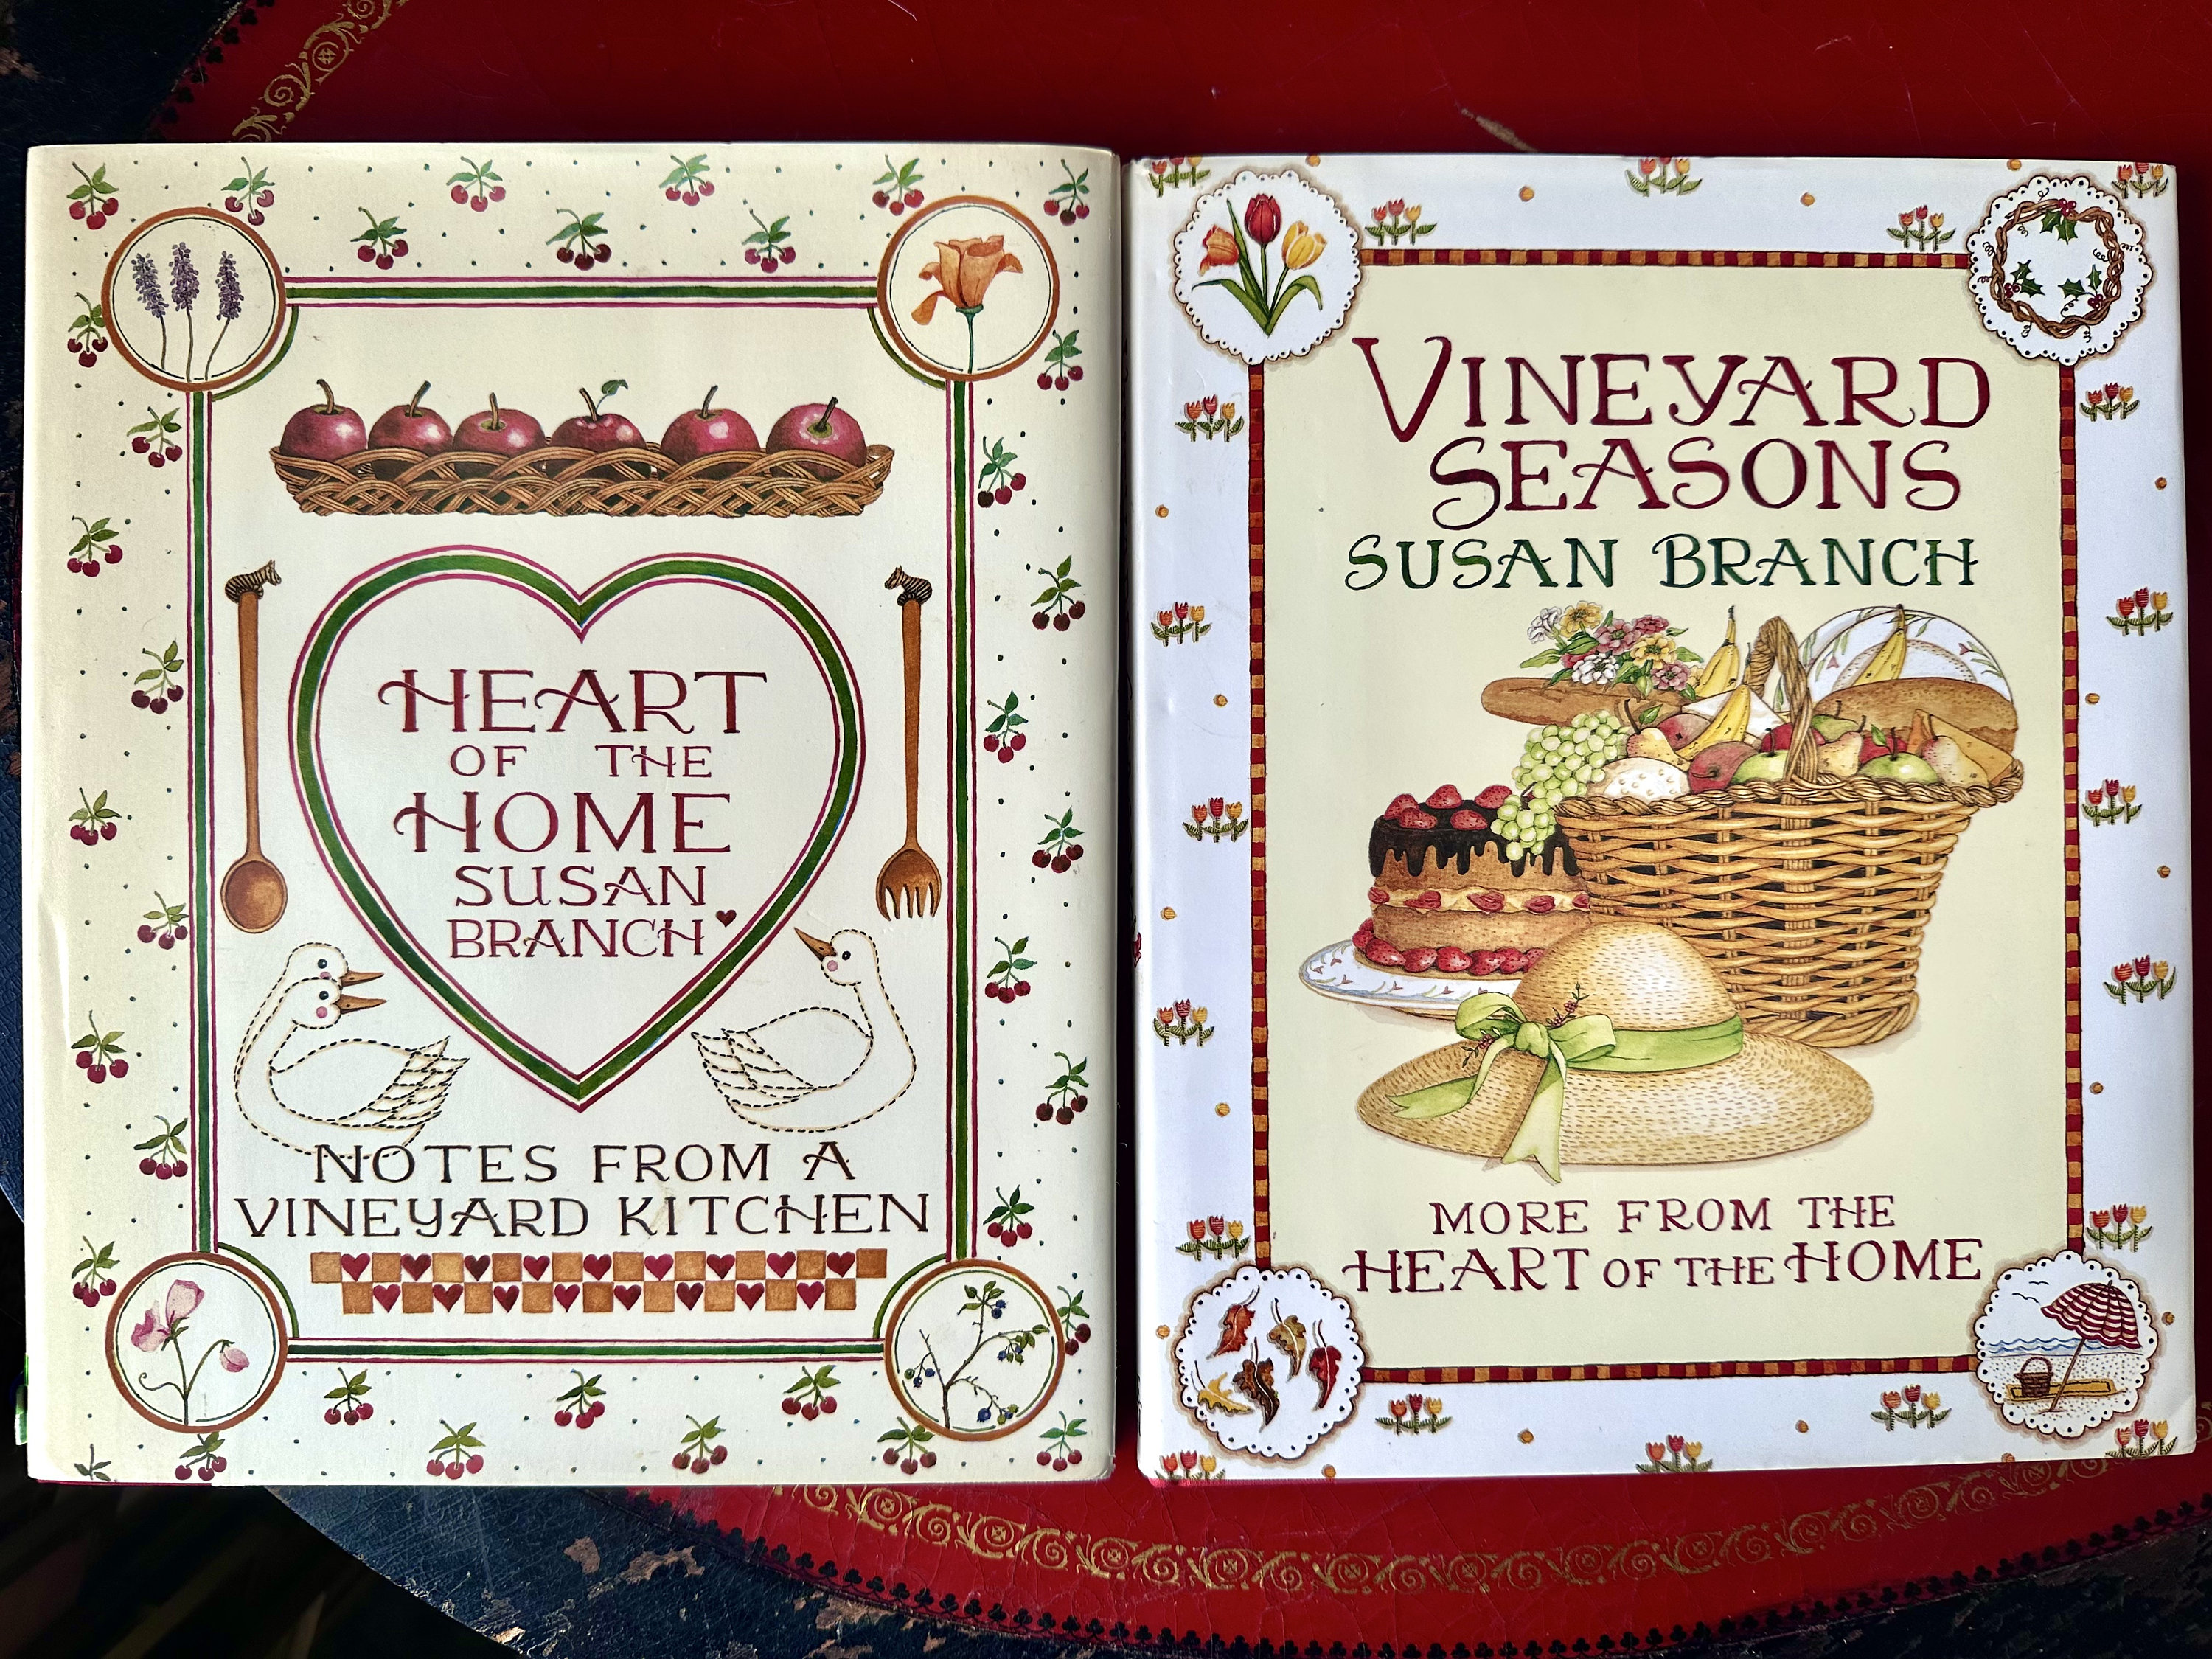 Heart of the Home AND Vineyard Seasons by Susan Branch